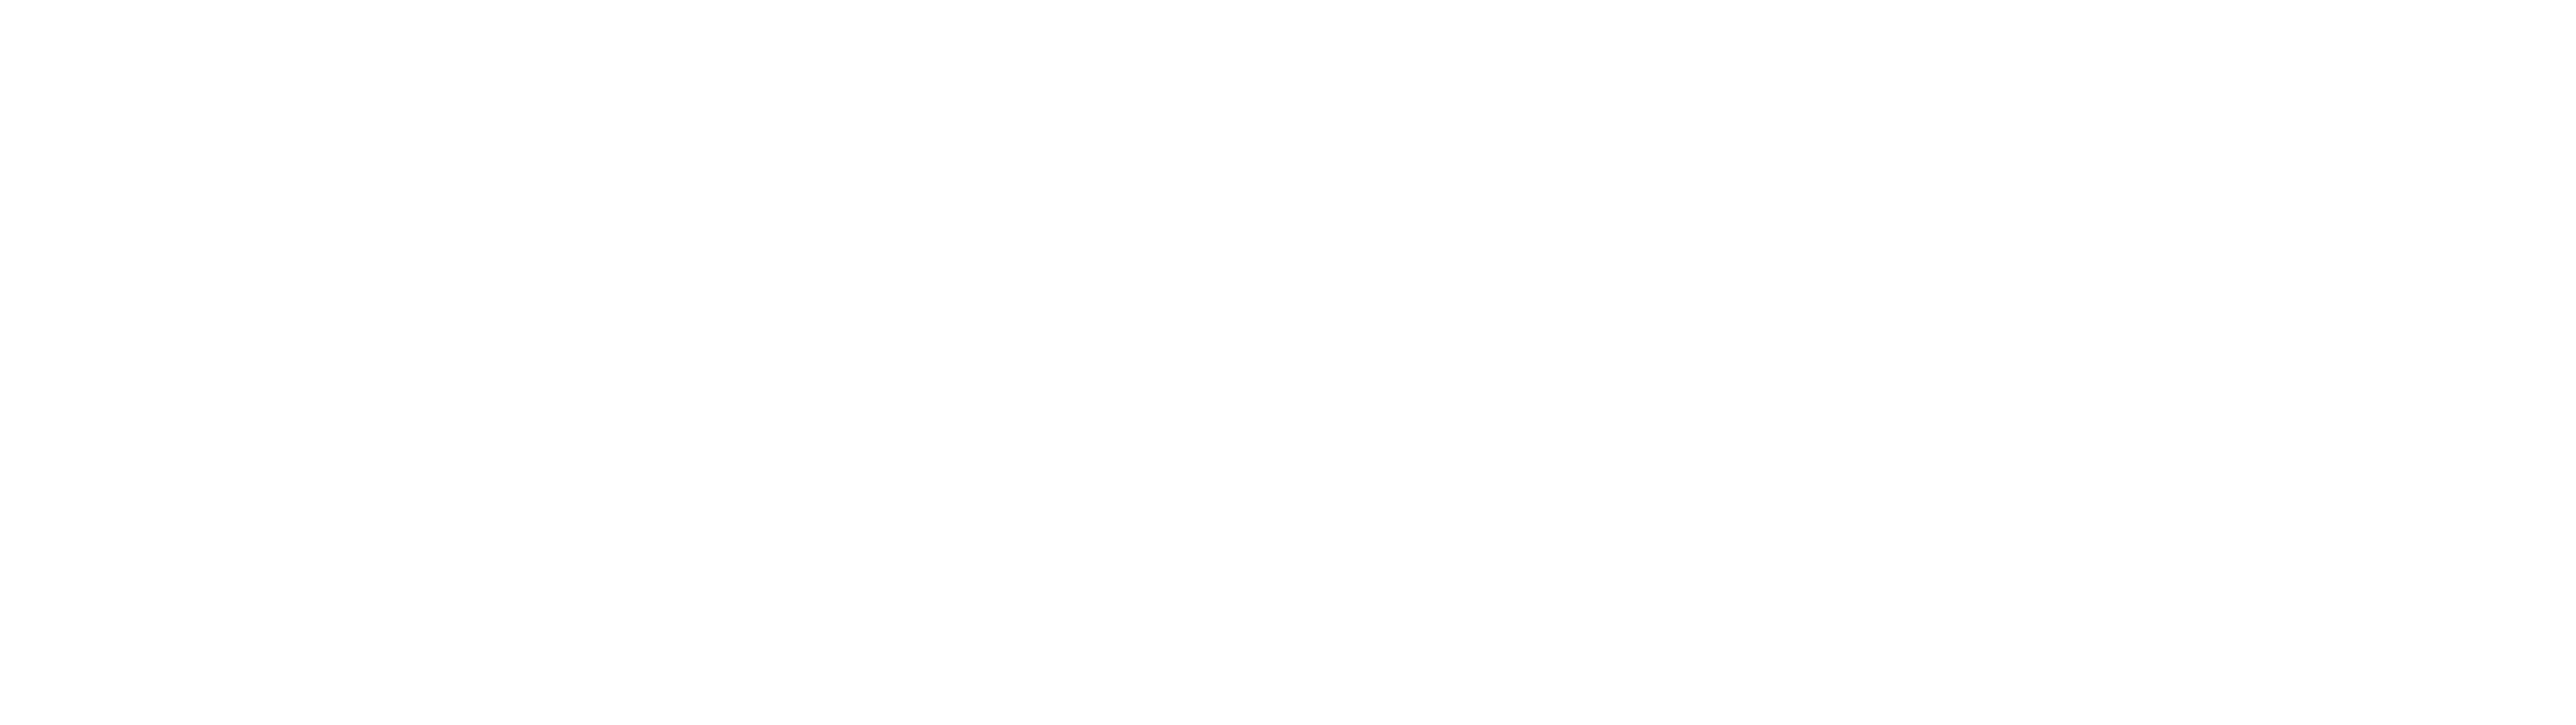 Logo of the company: global-foundries